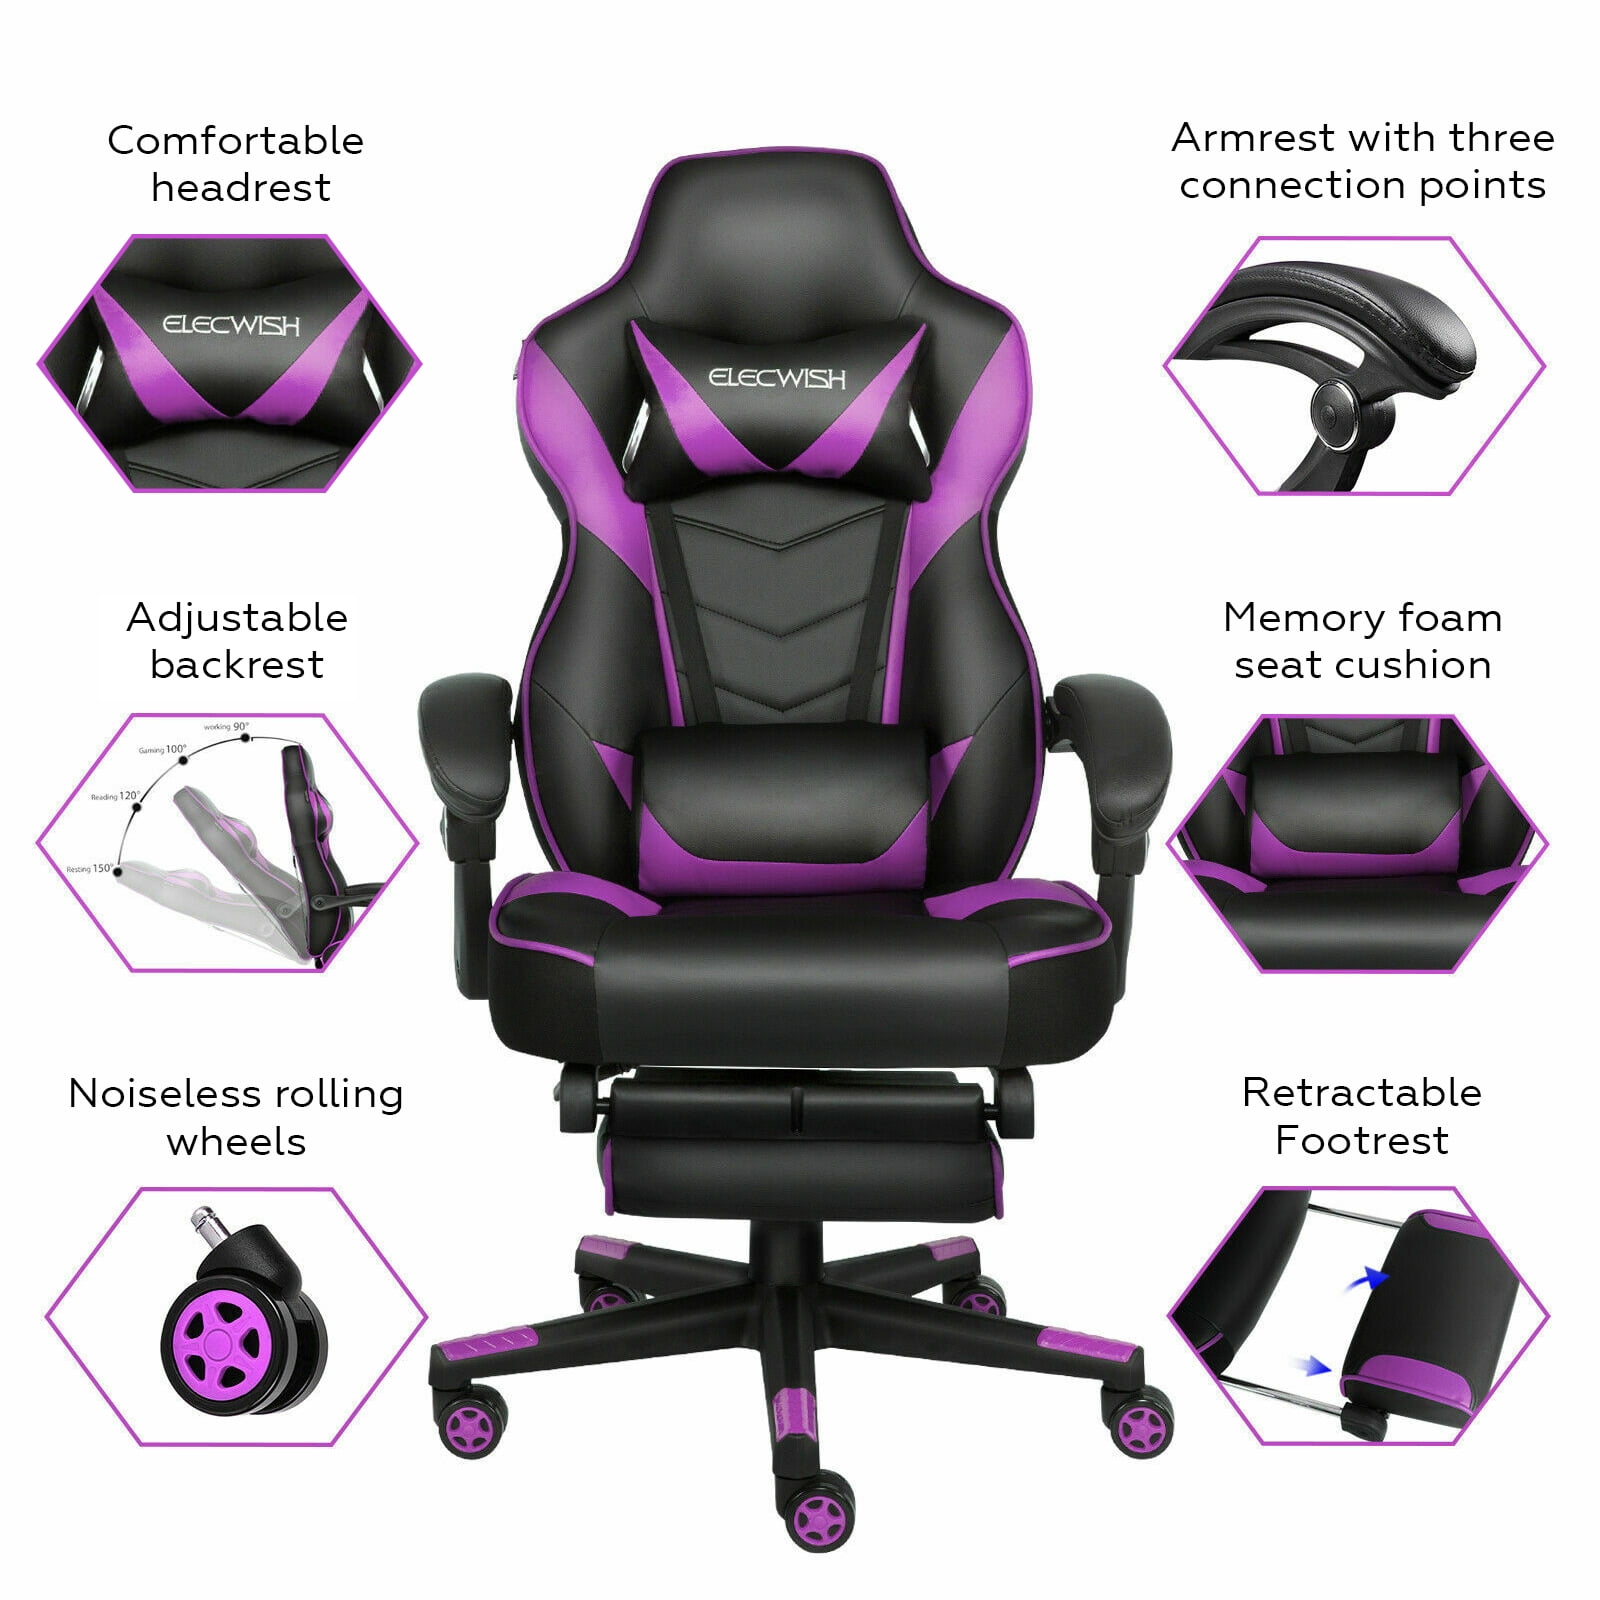 Red High Back Swivel Desk Computer Chairs for Home Office YOURLITEAMZ Massage Gaming Office Chair with Footrest Ergonomic PC Gaming Chair Foldable with Headrest Lumbar Support 